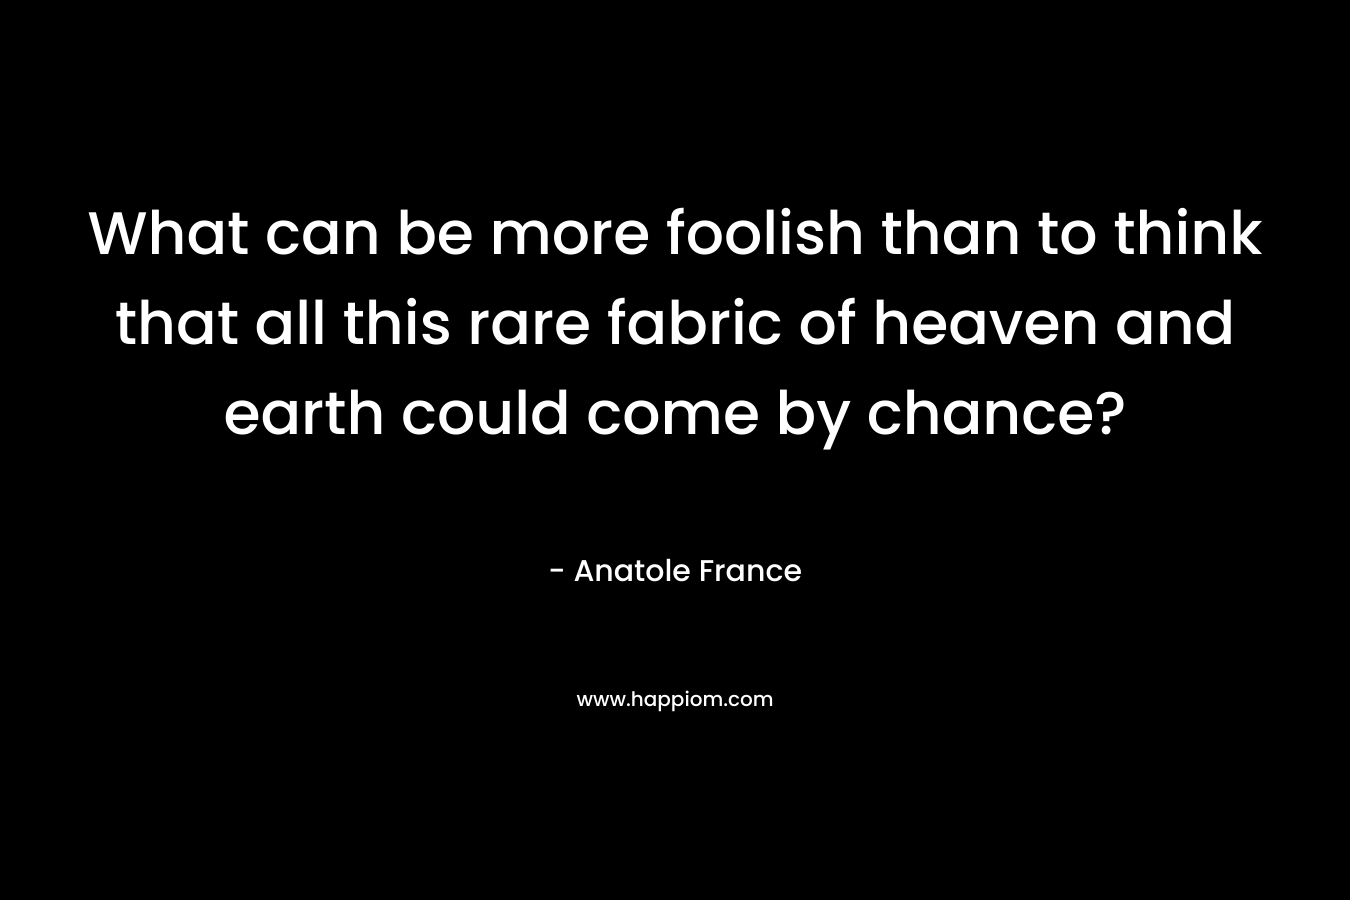 What can be more foolish than to think that all this rare fabric of heaven and earth could come by chance? – Anatole France